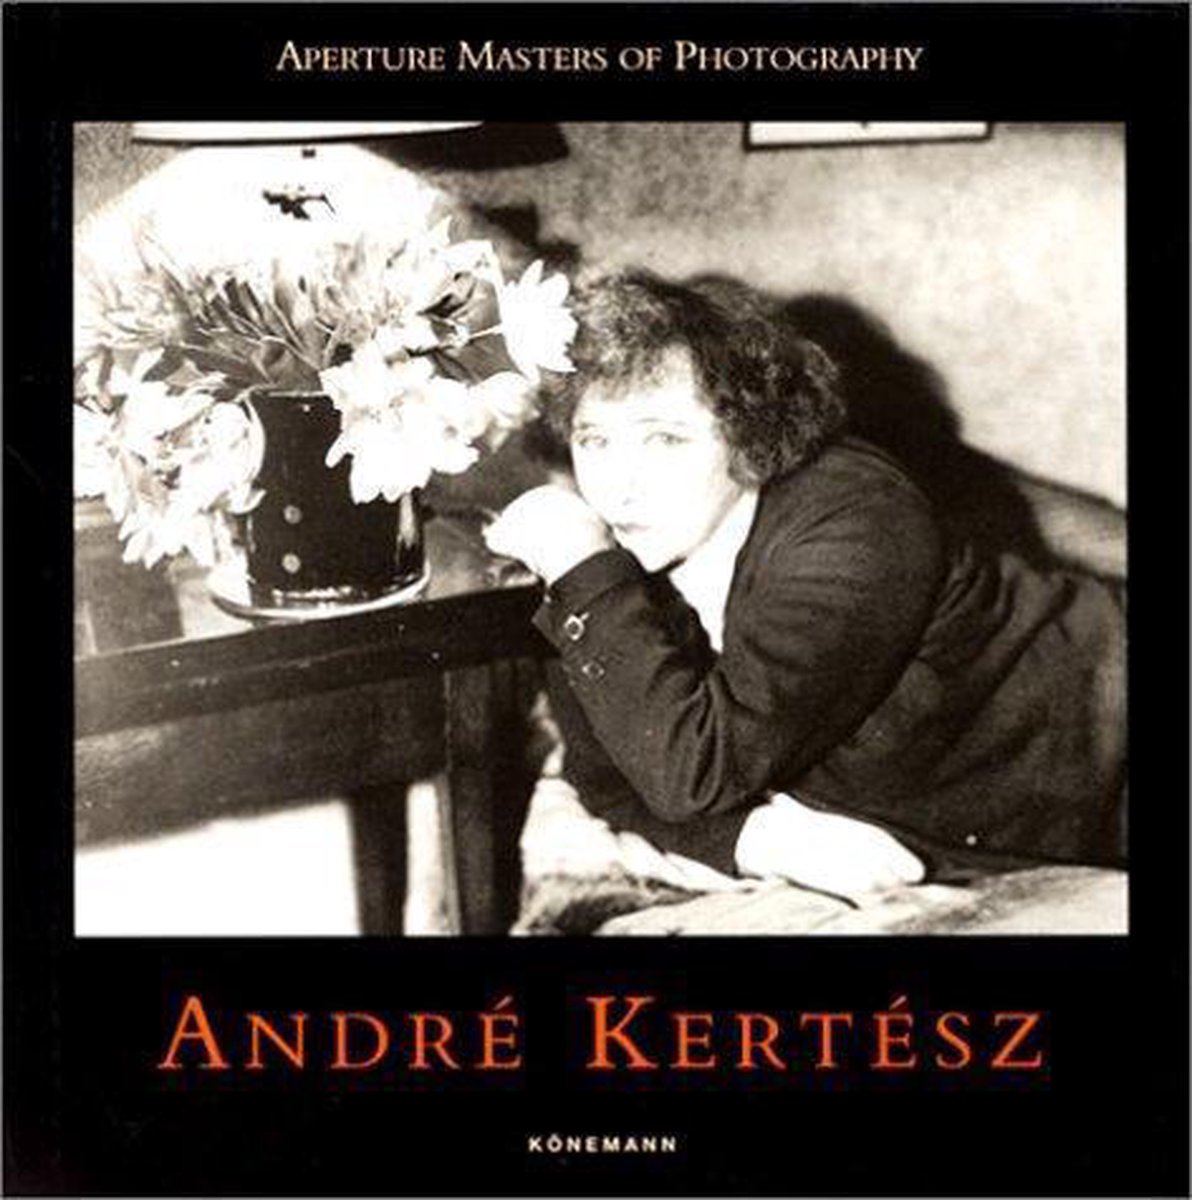 Andre KertÃ©sz ; Aperture Masters of Photography